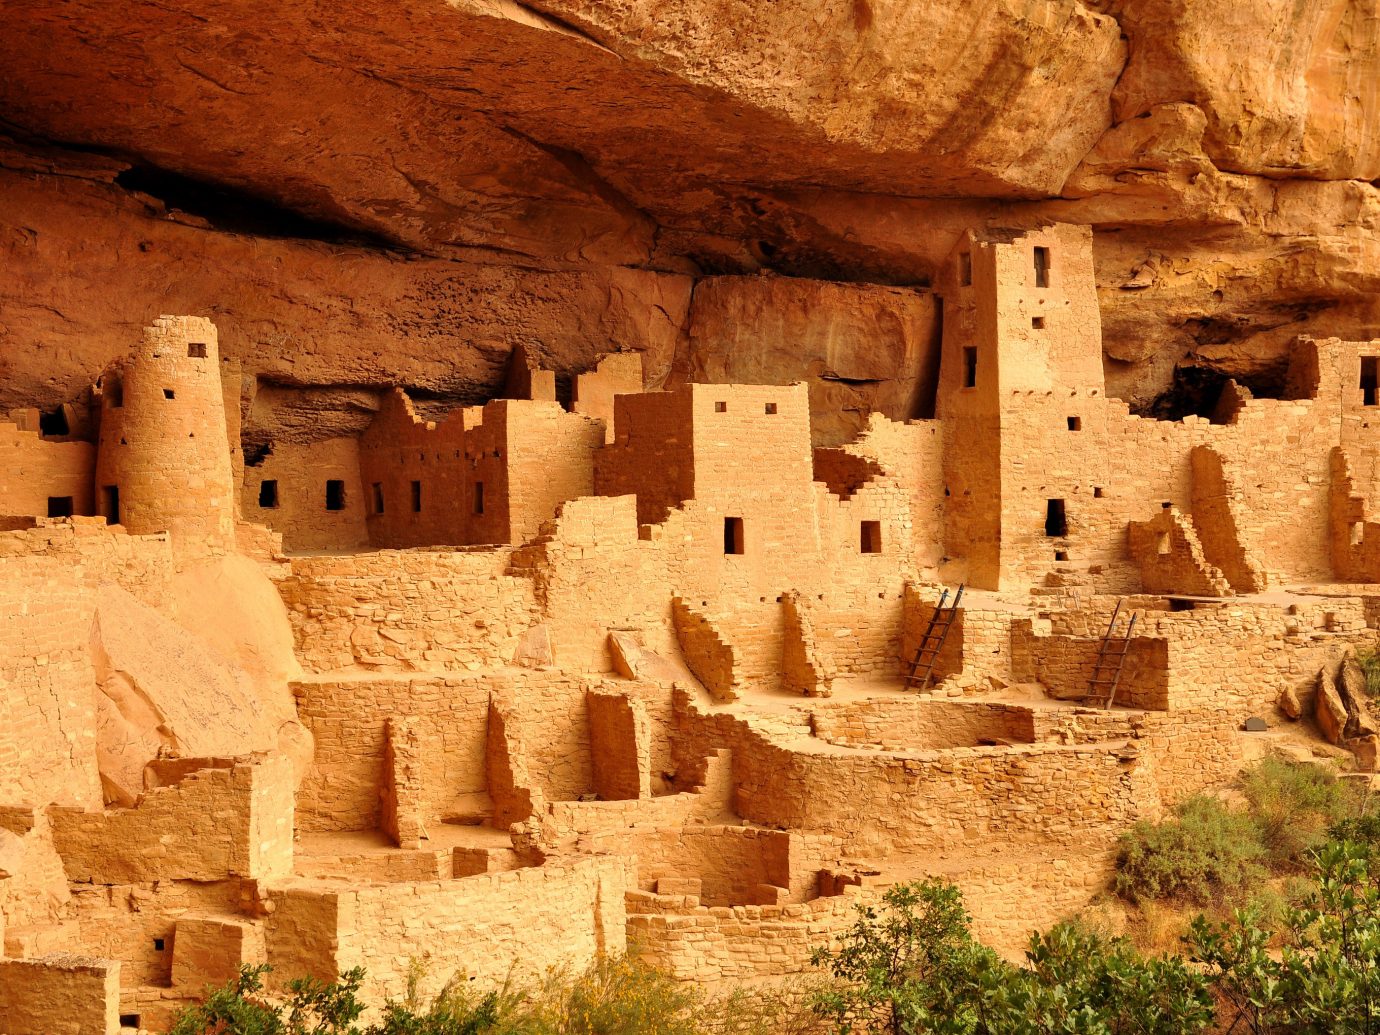 Trip Ideas Nature cliff historic site Ruins archaeological site outdoor ancient history egyptian temple wadi arch fortification temple cliff dwelling middle ages formation monastery history unesco world heritage site stone